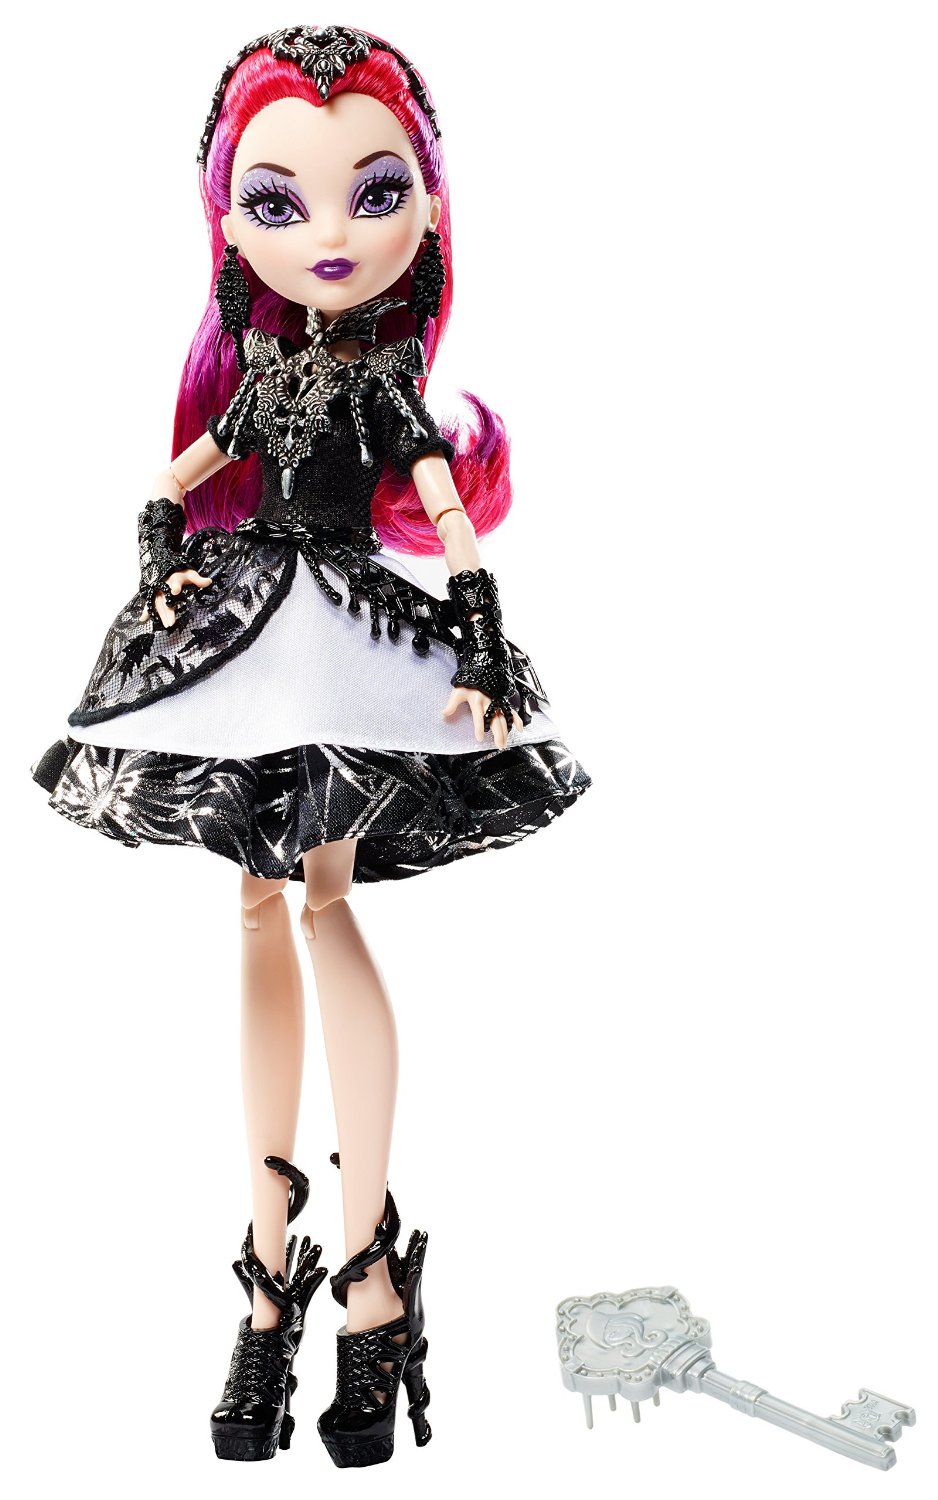 Monster High by Airi  Ever after high, Apple white, Dragon games